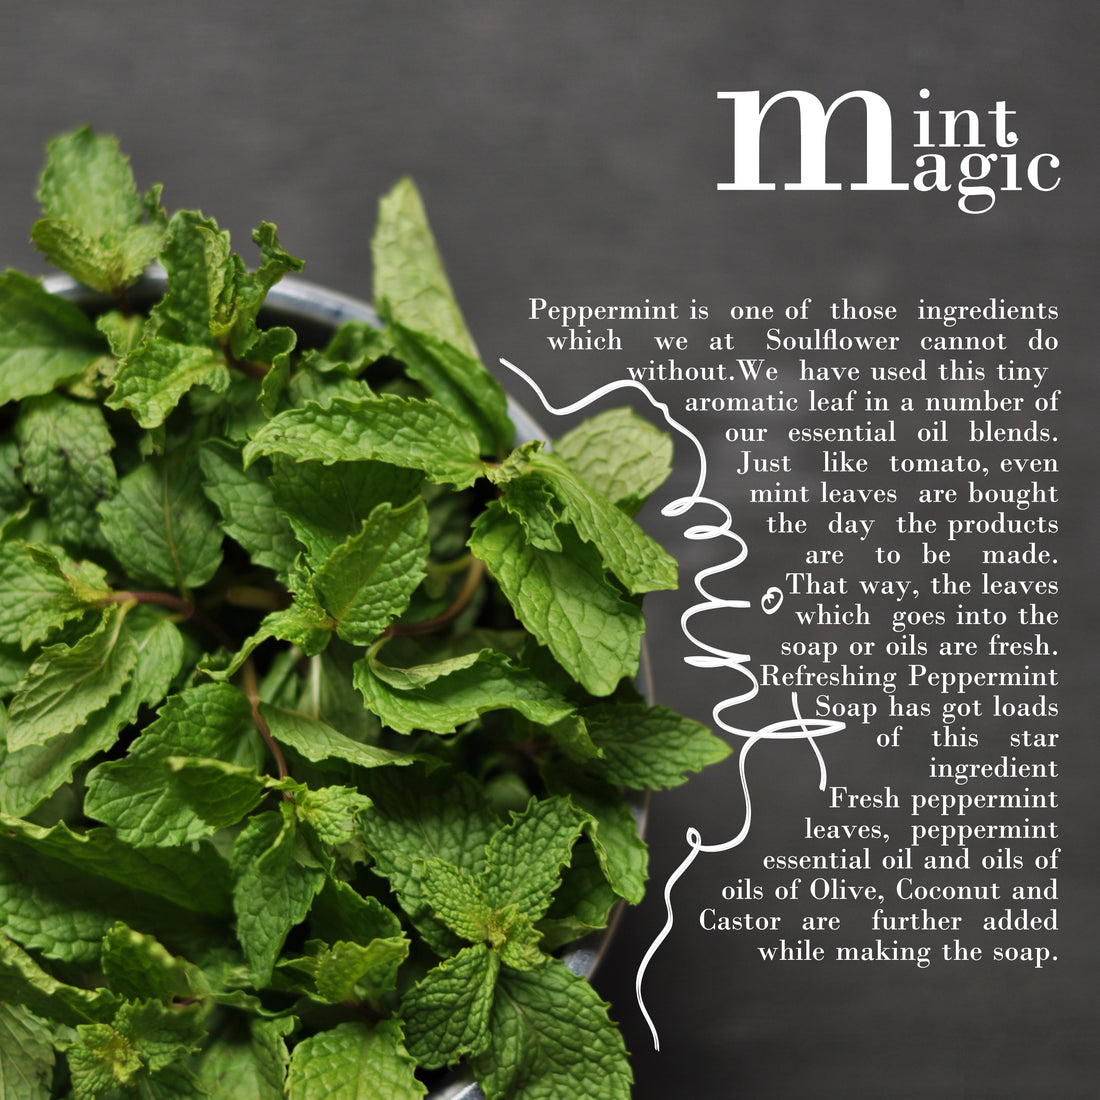 It's all about Mint Magic!